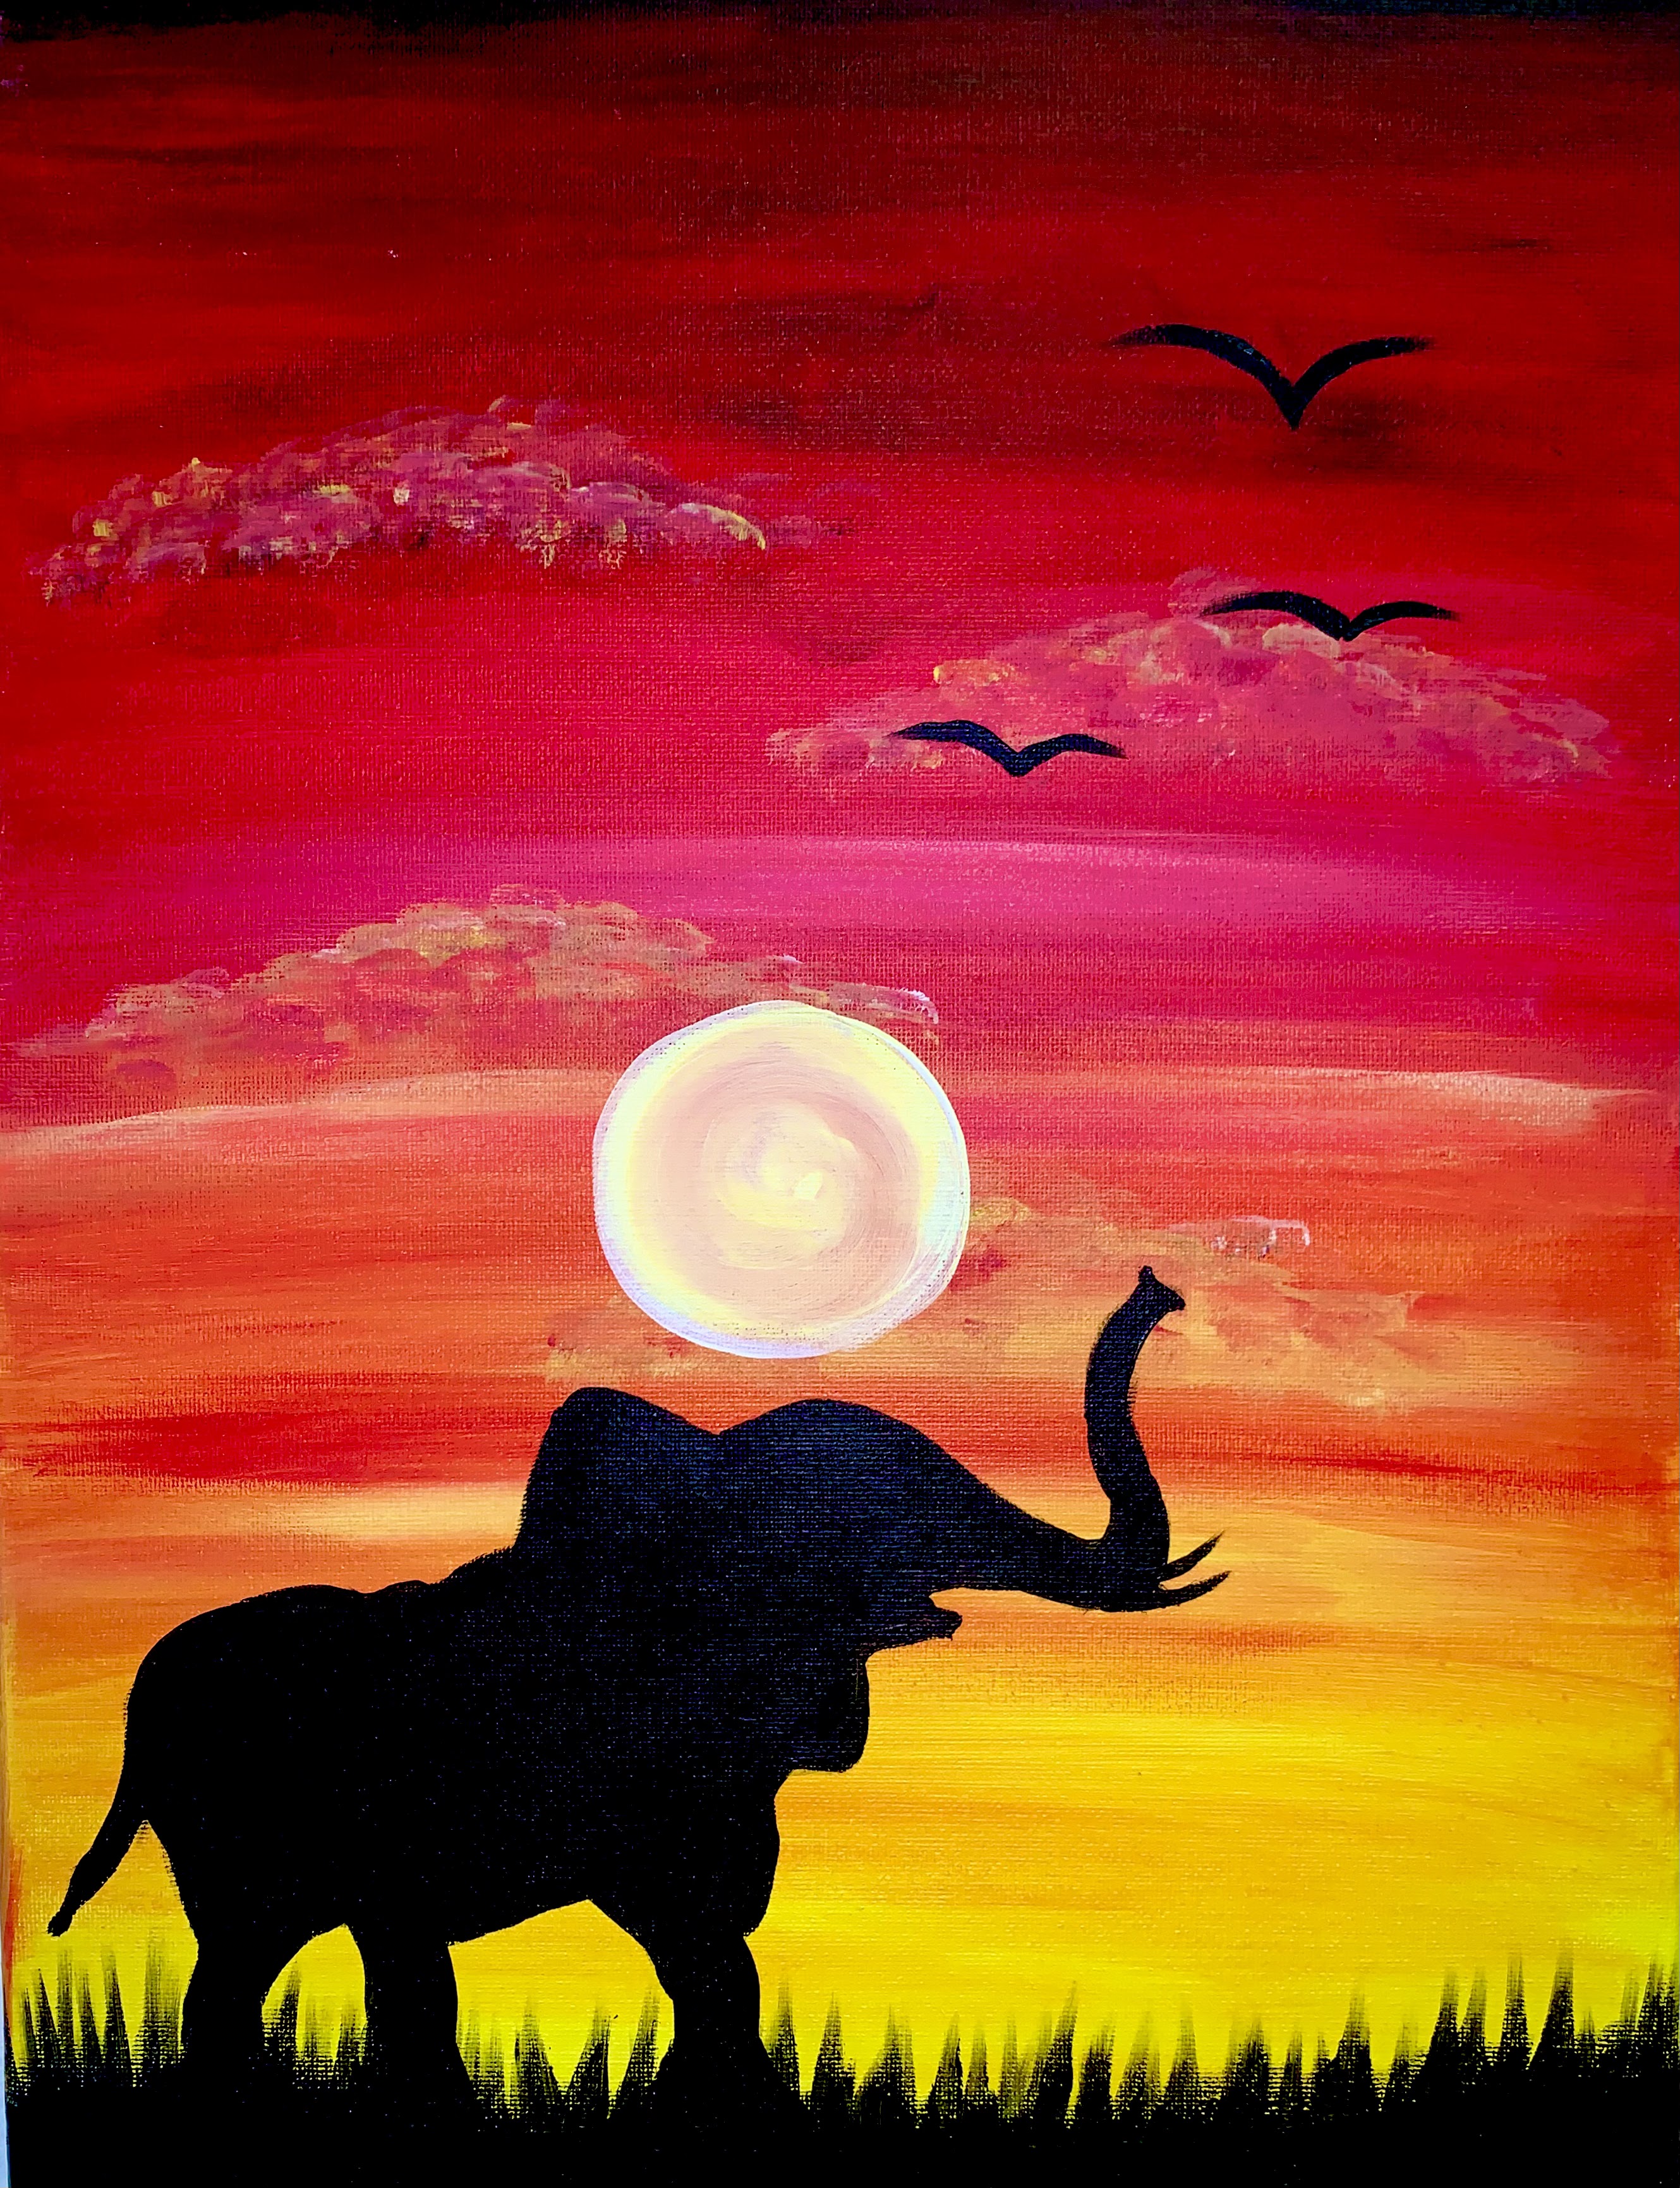 A Elephant Trunk on the Sunset  experience project by Yaymaker